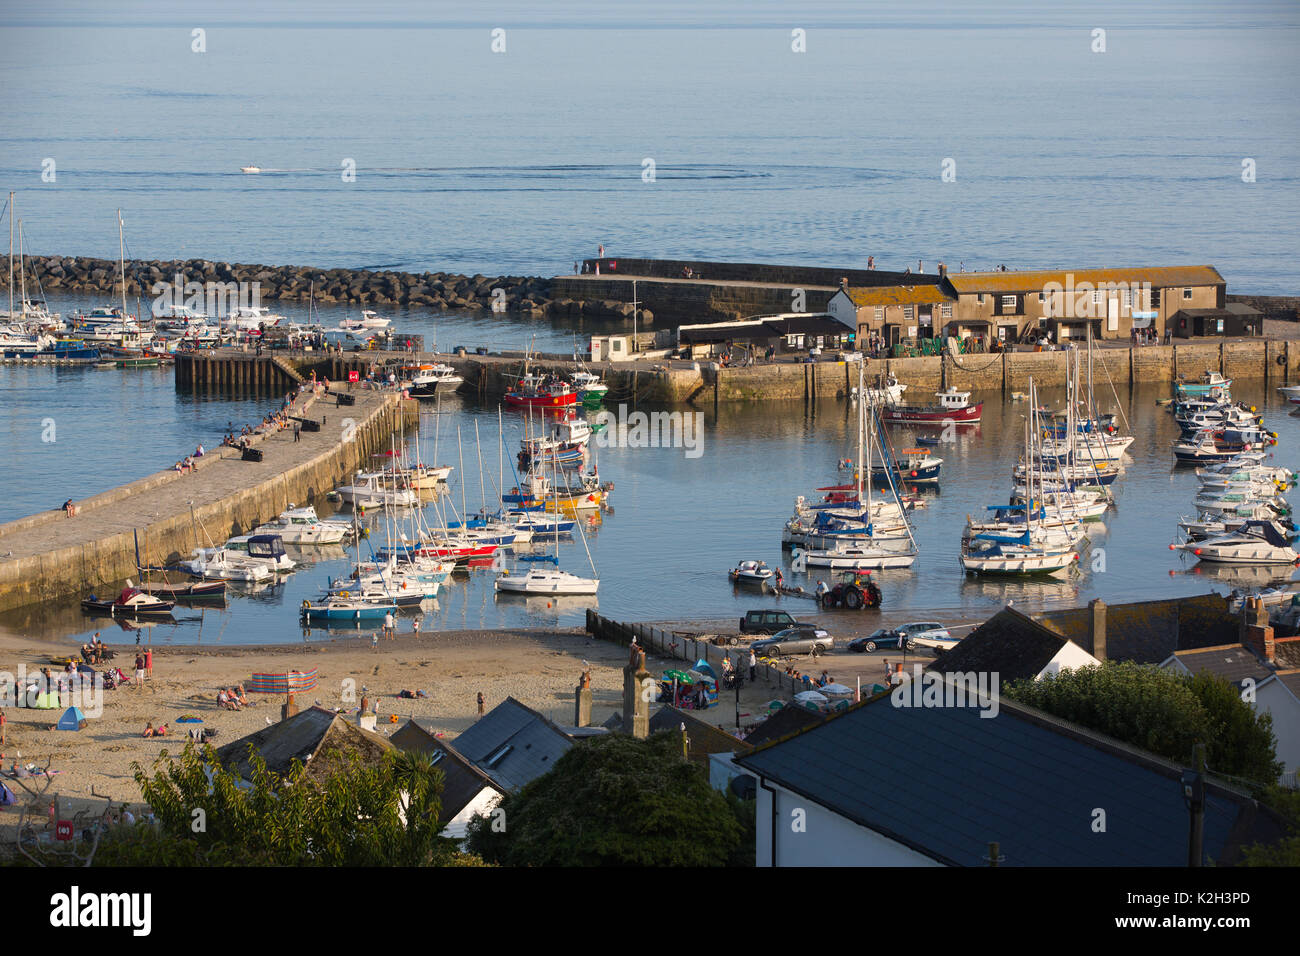 Lyme Regis, ancient town featured in the Domesday Book, with historical Cobb and harbour landmarks at the Dorset-Devon border, South West England, UK Stock Photo